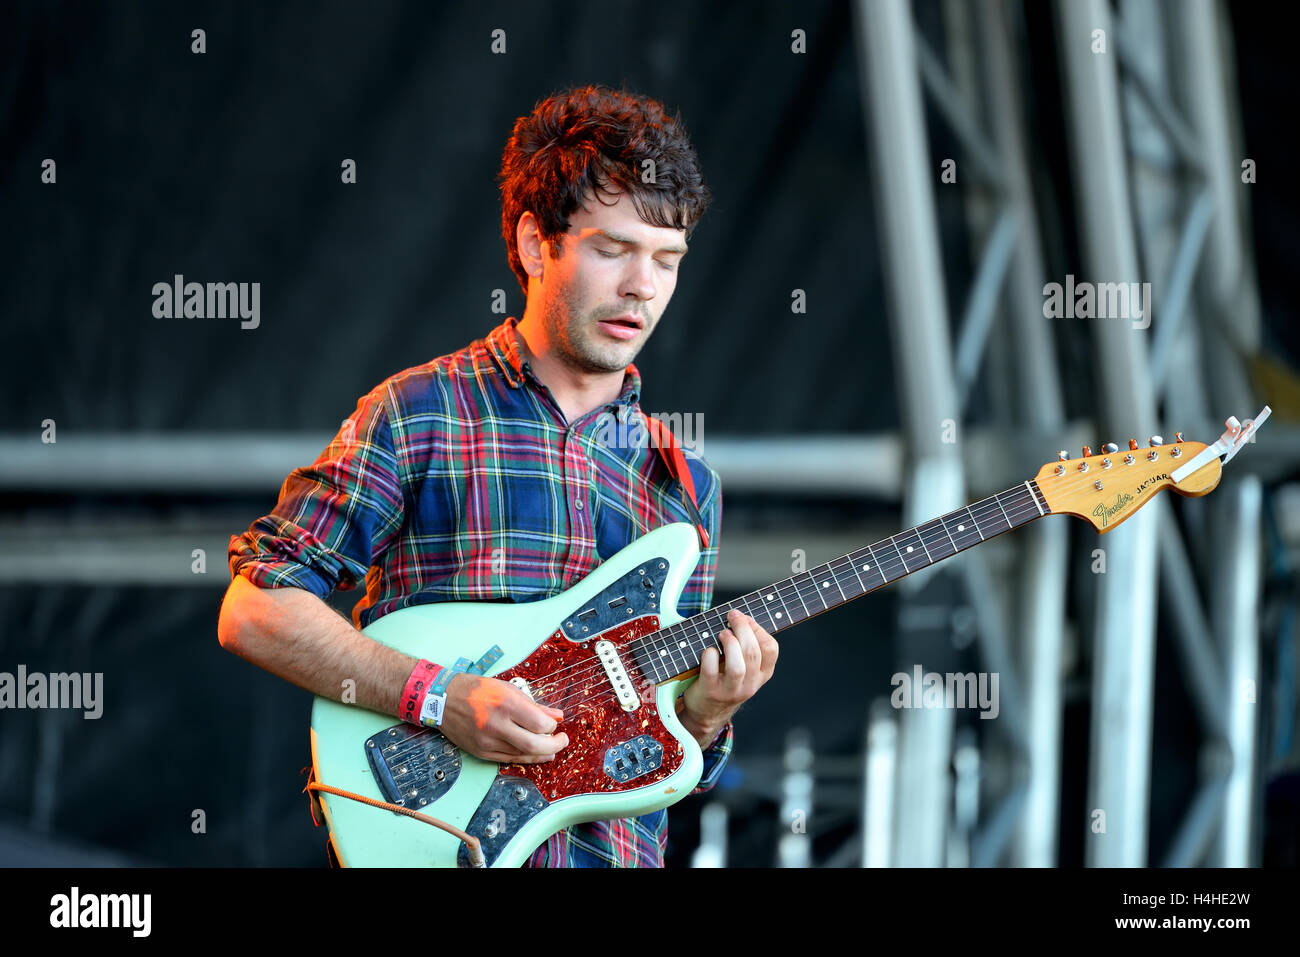 BARCELONA - MAY 28: Viet Cong (band) performs at Primavera Sound 2015 Festival on May 28, 2015 in Barcelona, Spain. Stock Photo